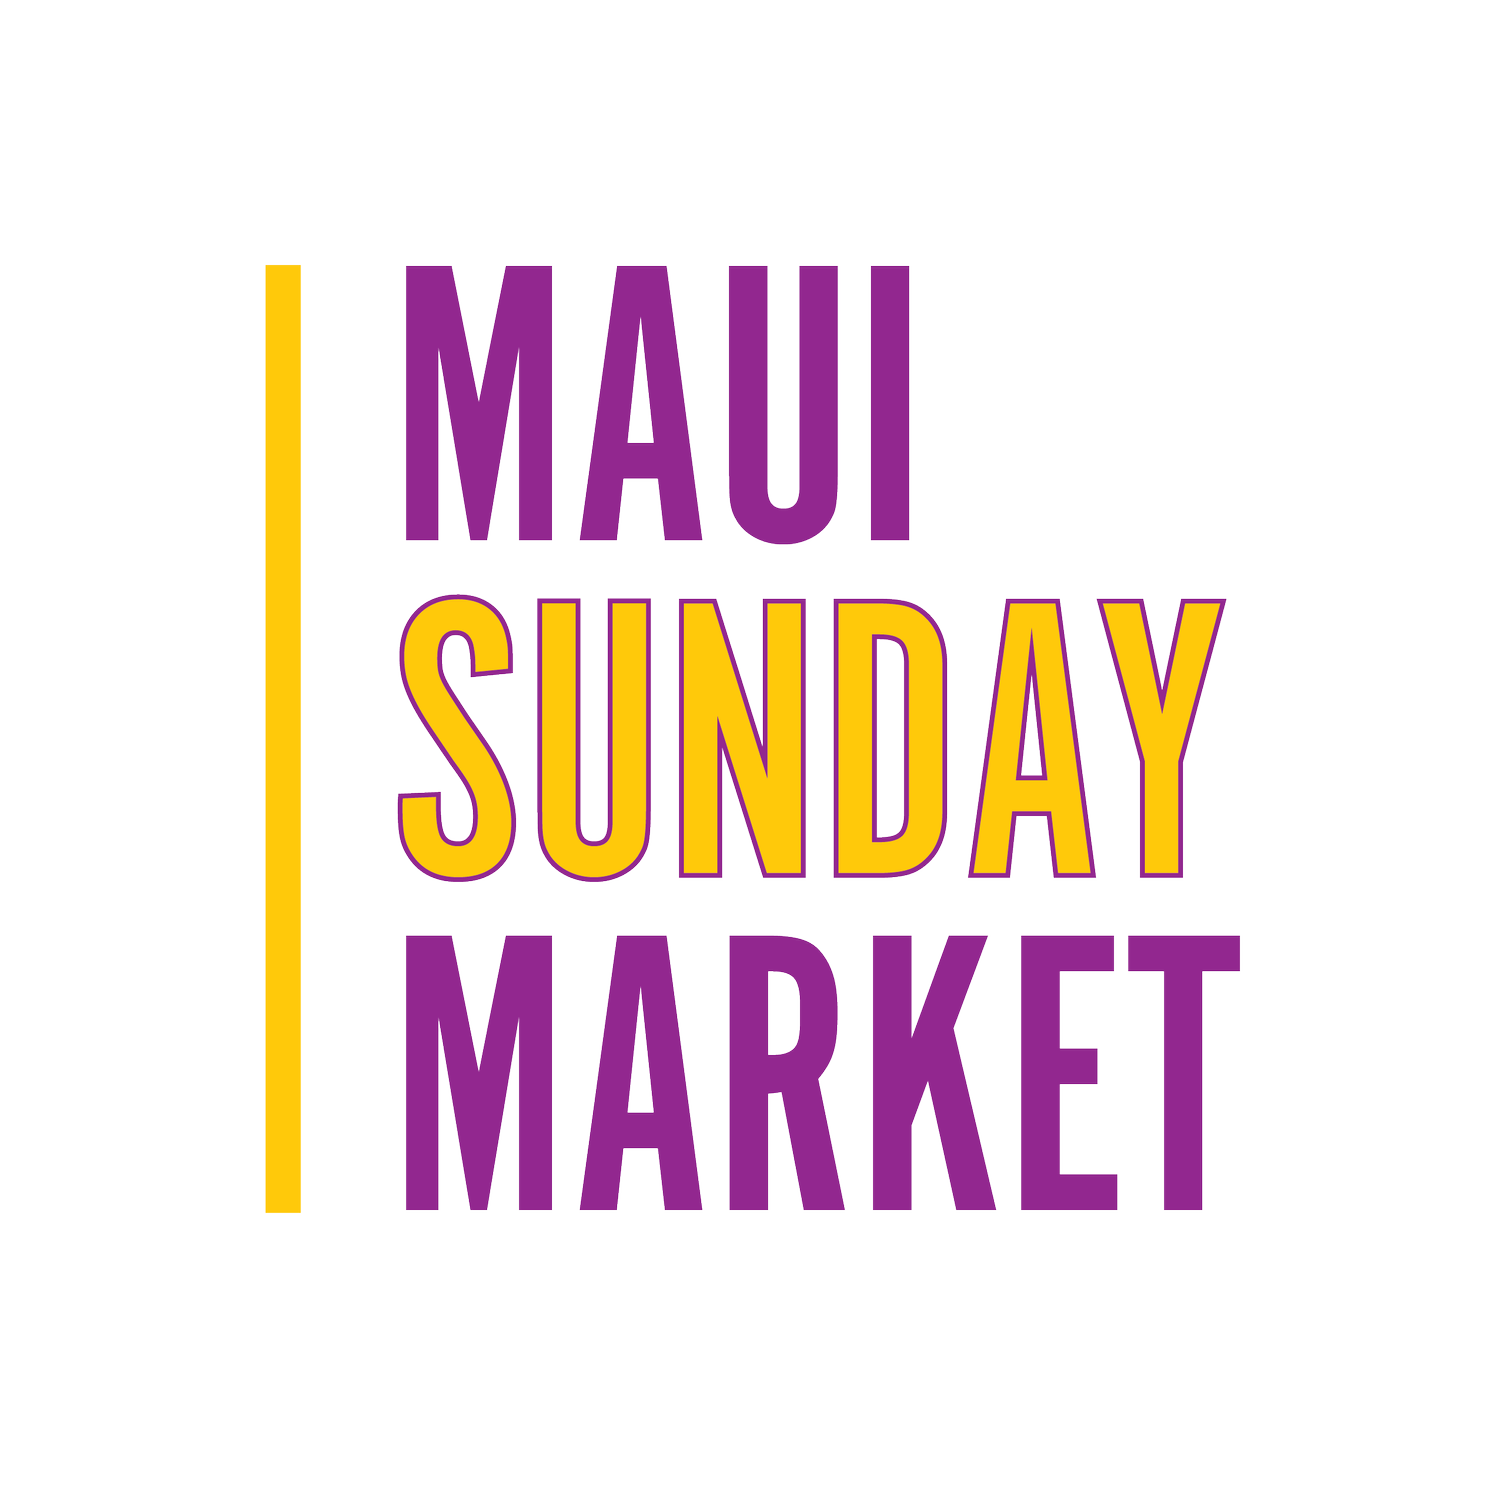 Logo of the maui sunday market with stylized text and color accents.